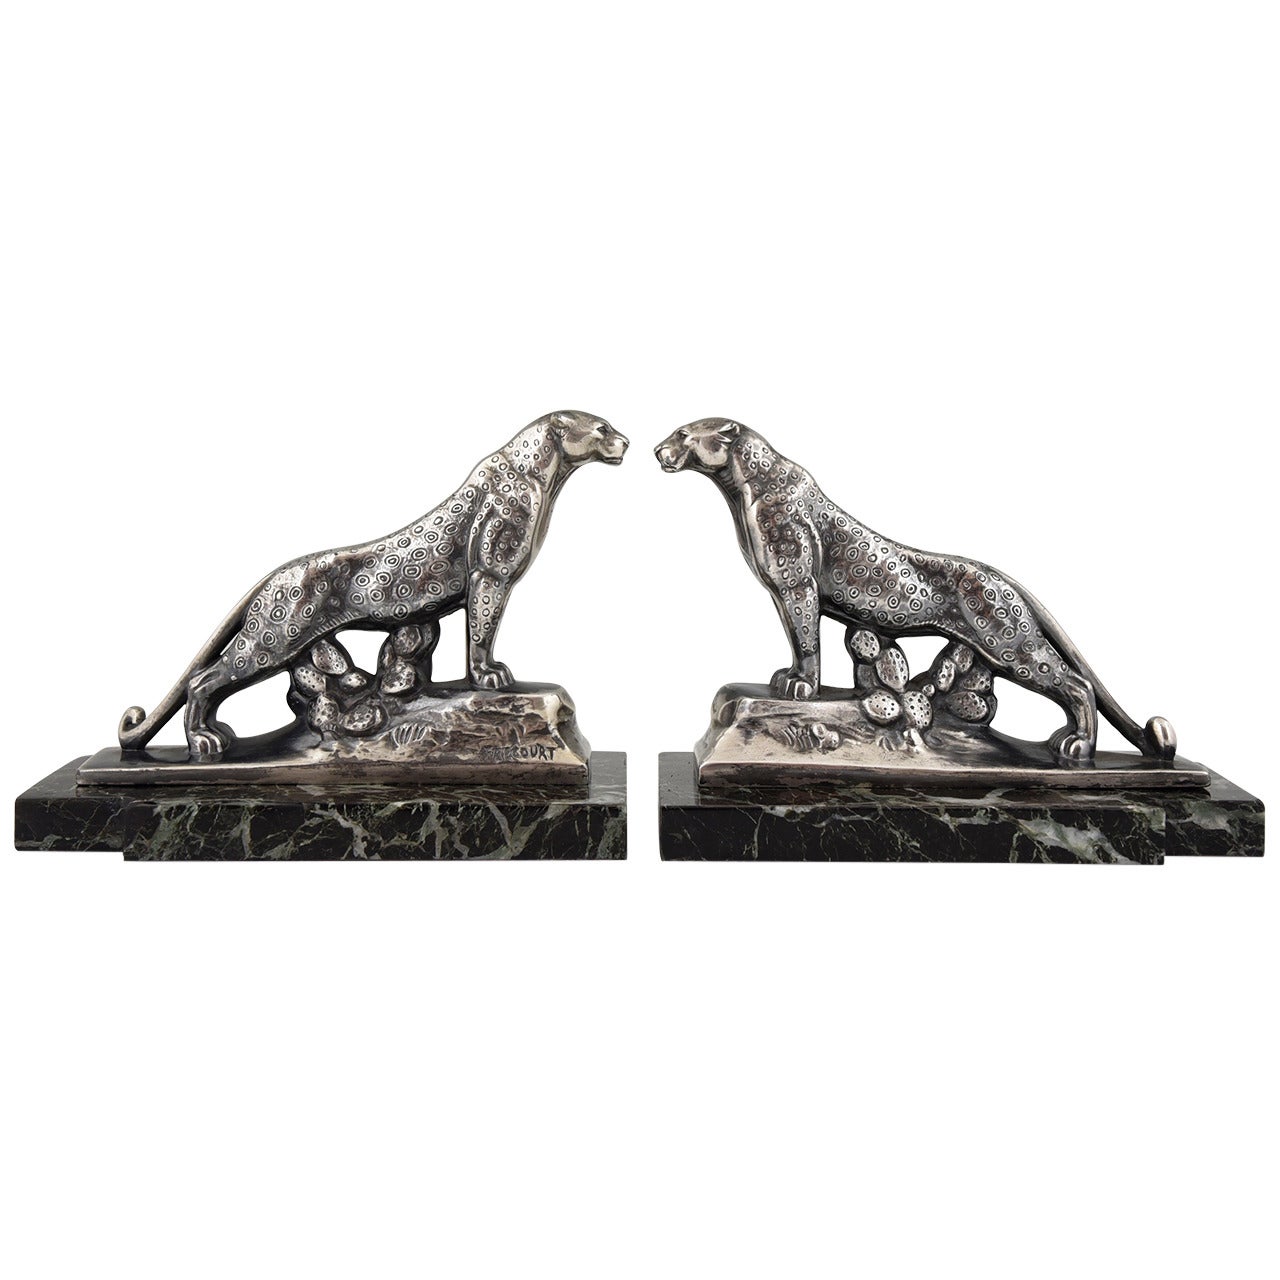 Pair of Art Deco Silvered Bookends by M. Frecourt, 1930